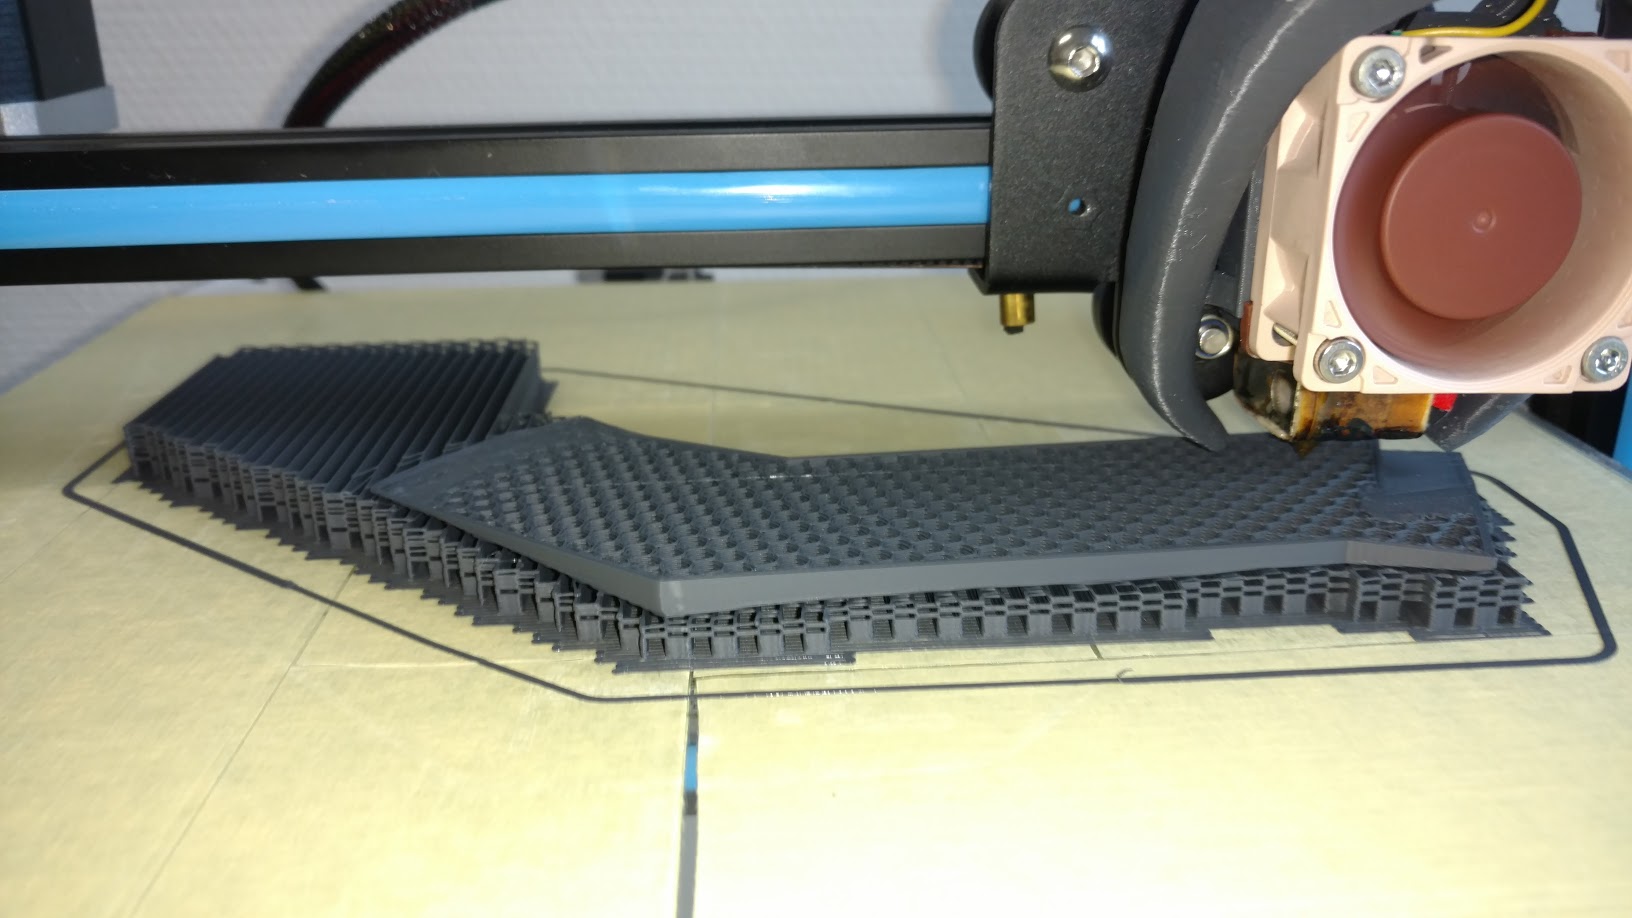 One of the mounting arm during print